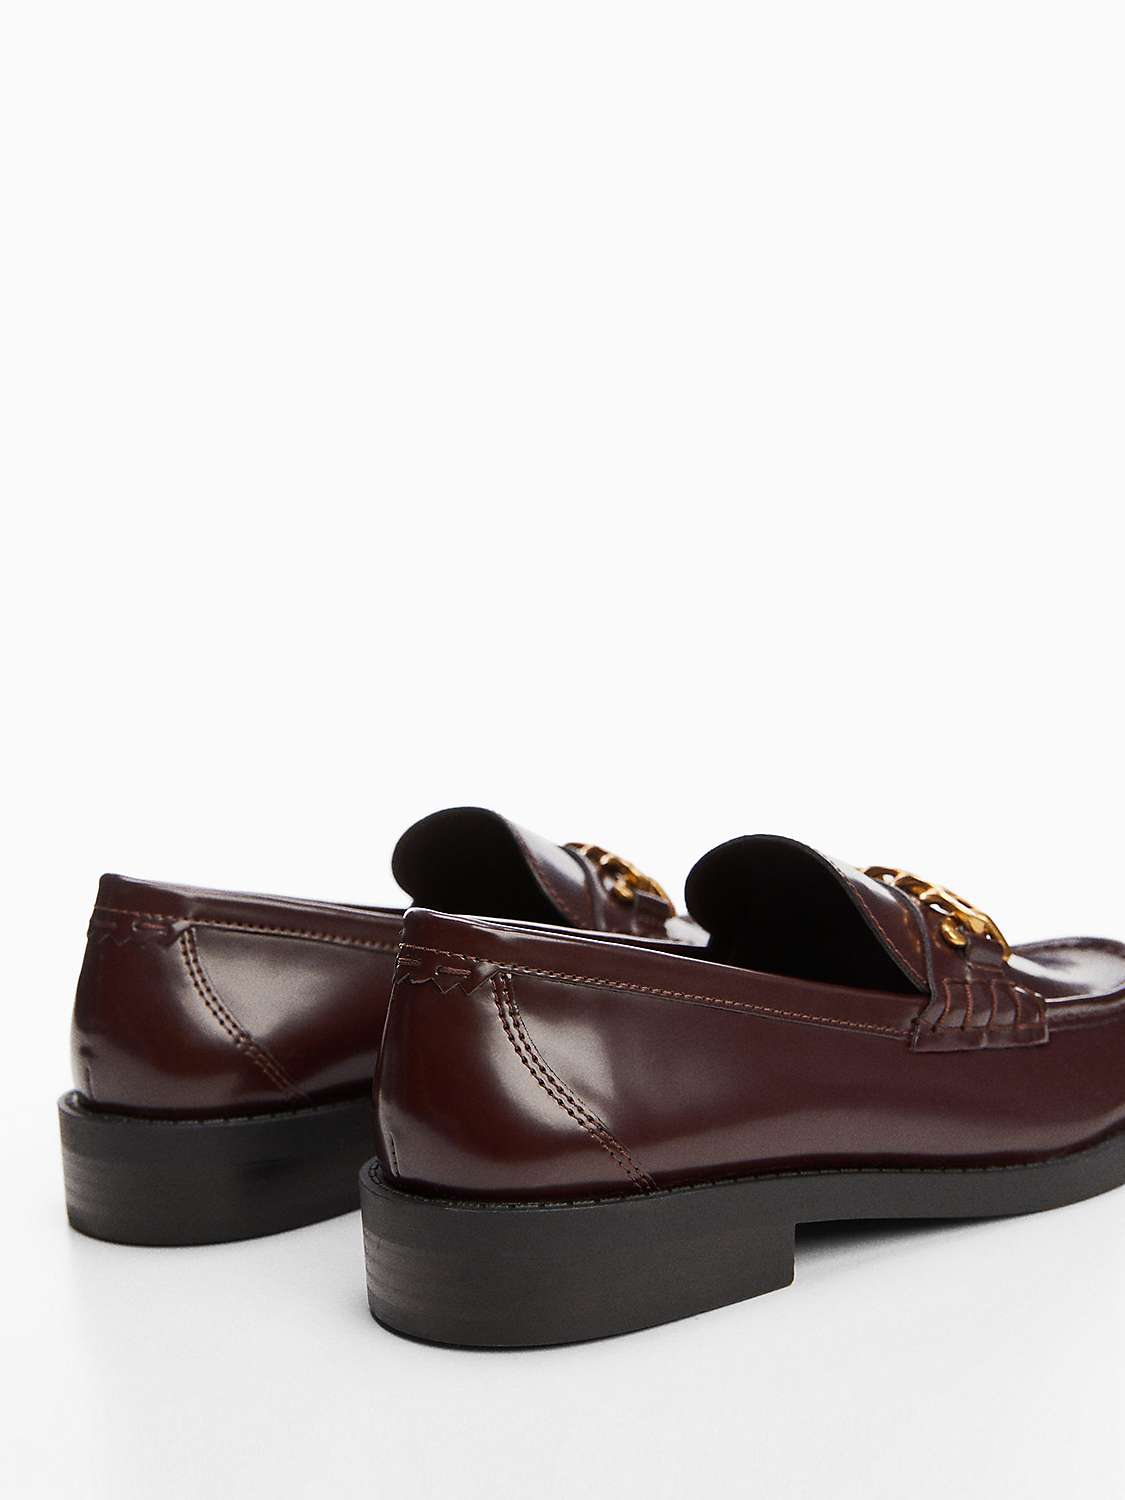 Buy Mango Chain Detail Loafers, Dark Red Online at johnlewis.com